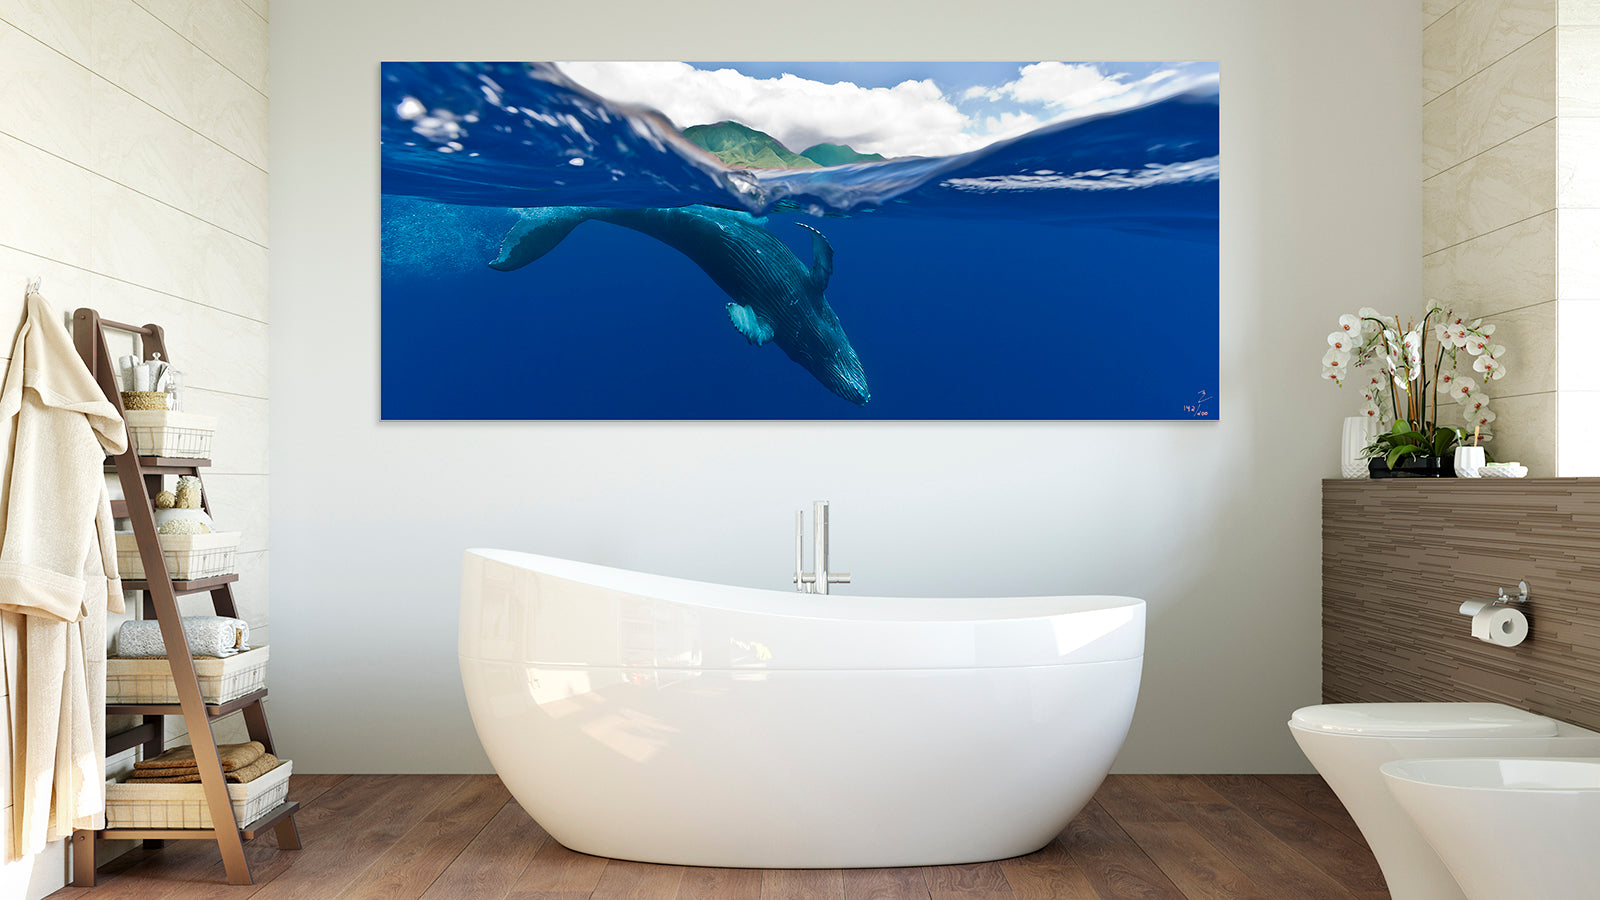 Maui keiki is fine art print of a baby whale dipping under the wave with the west maui mountains in the background. Cesere Brothers. Keiki Kohola Project. Art in home. Maui, Hawaii. bathroom